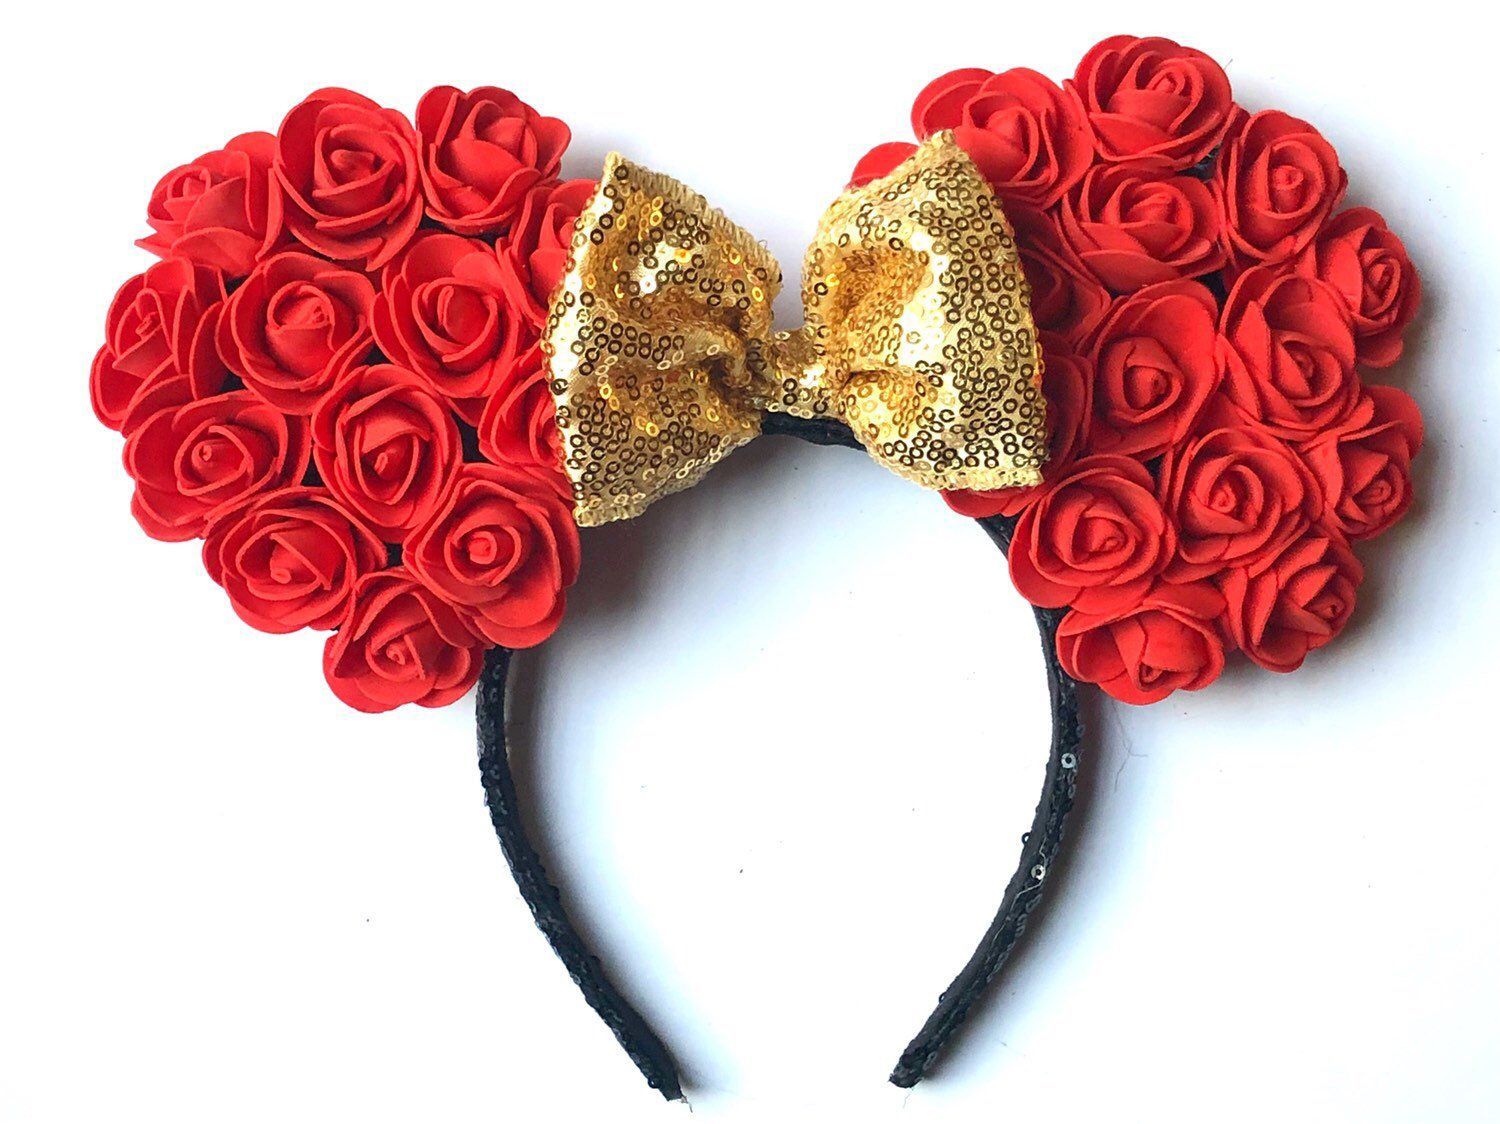 Belle ears, Beast mouse ears, Beauty and the Beast ears, mickey ears, minnie ears, disney ears, magic kingdom ears, rose ears, flower ears - Belle ears, Beast mouse ears, Beauty and the Beast ears, mickey ears, minnie ears, disney ears, magic kingdom ears, rose ears, flower ears -   14 beauty And The Beast diy ideas